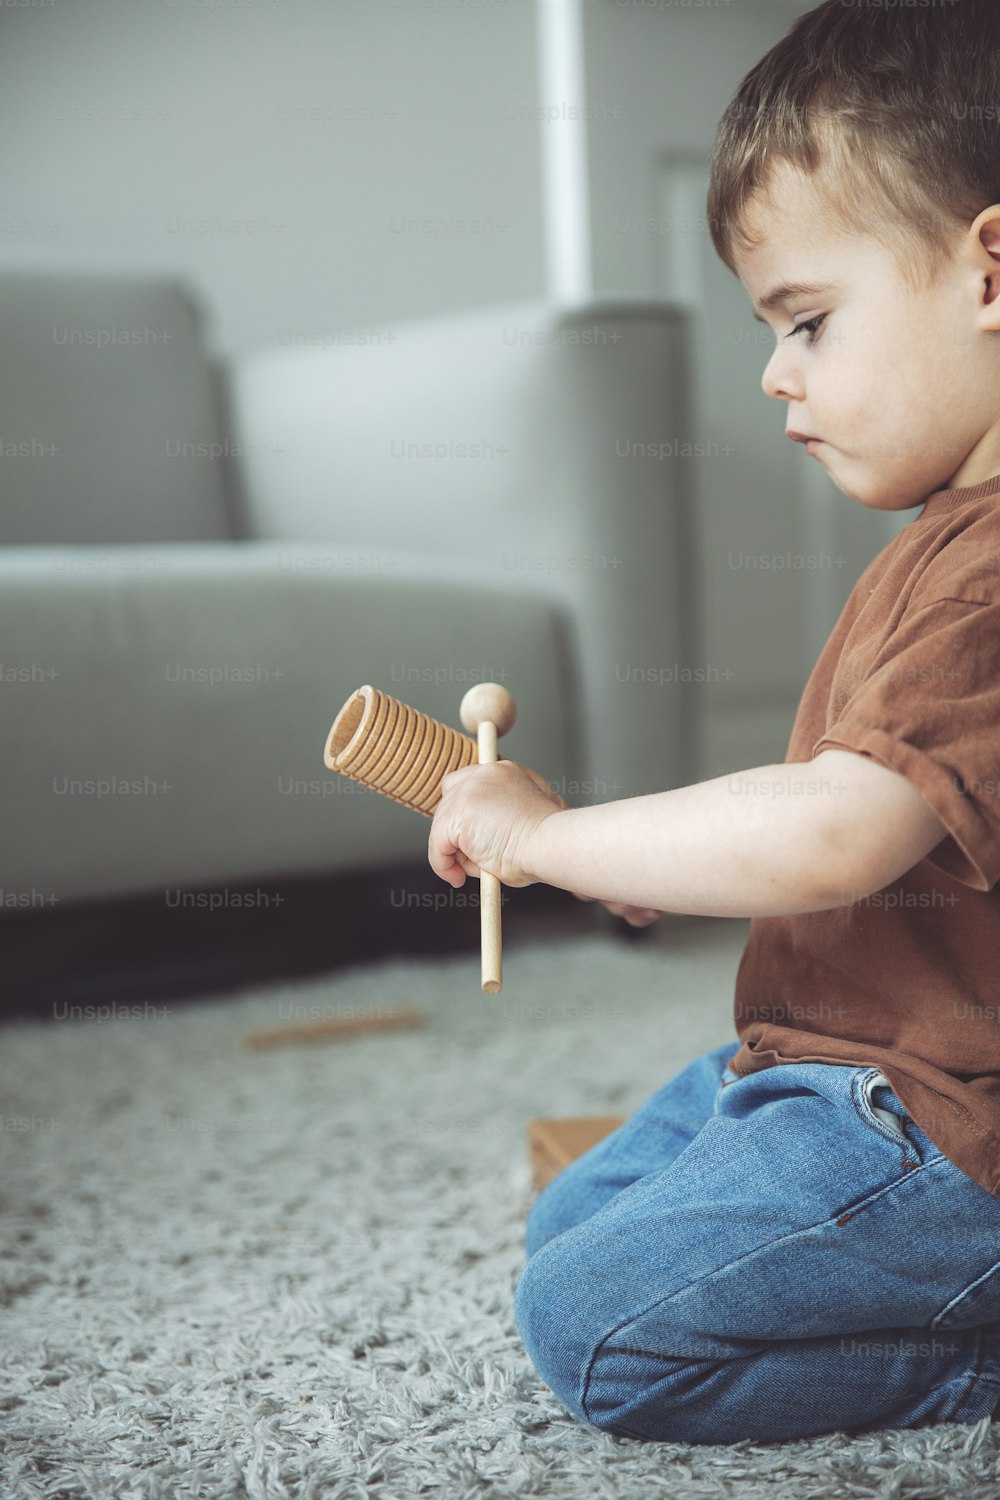 a young boy sitting on the floor playing with a toy